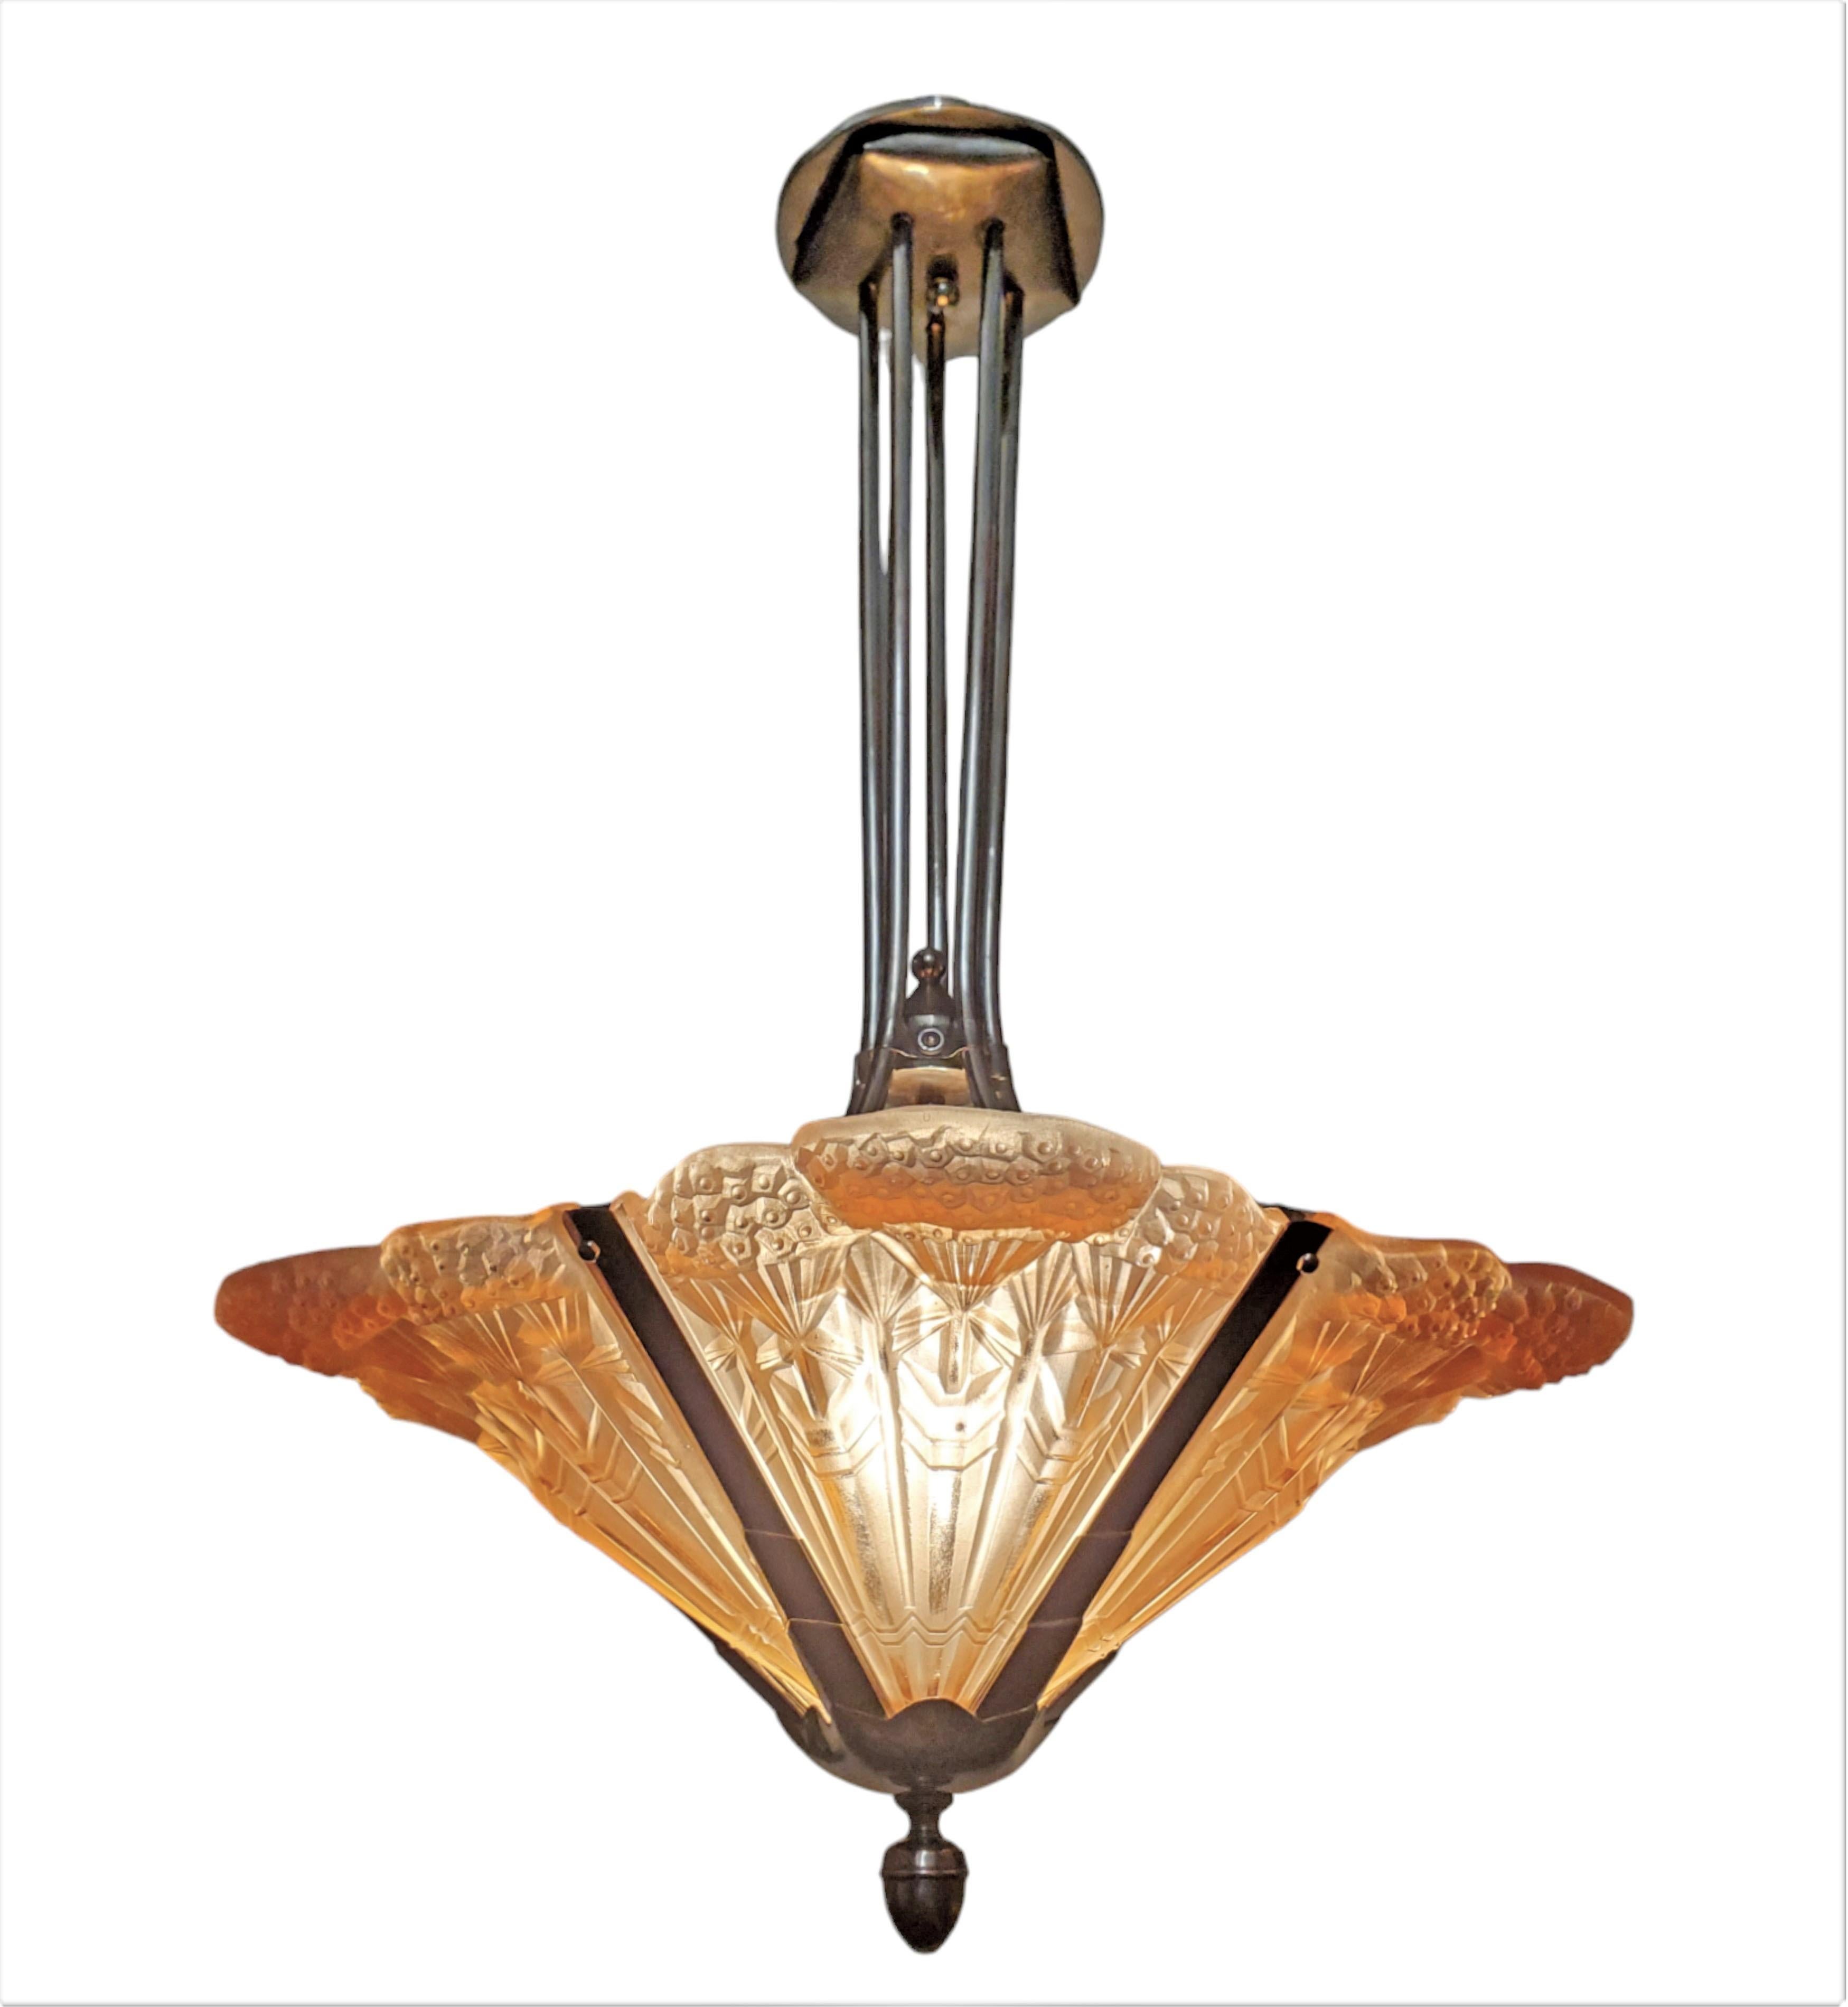 Stunning French Art Deco blossom chandelier signed Noverdy, France depose, in salmon or peach-tinted art glass. Its distinctive design comprises five  large 